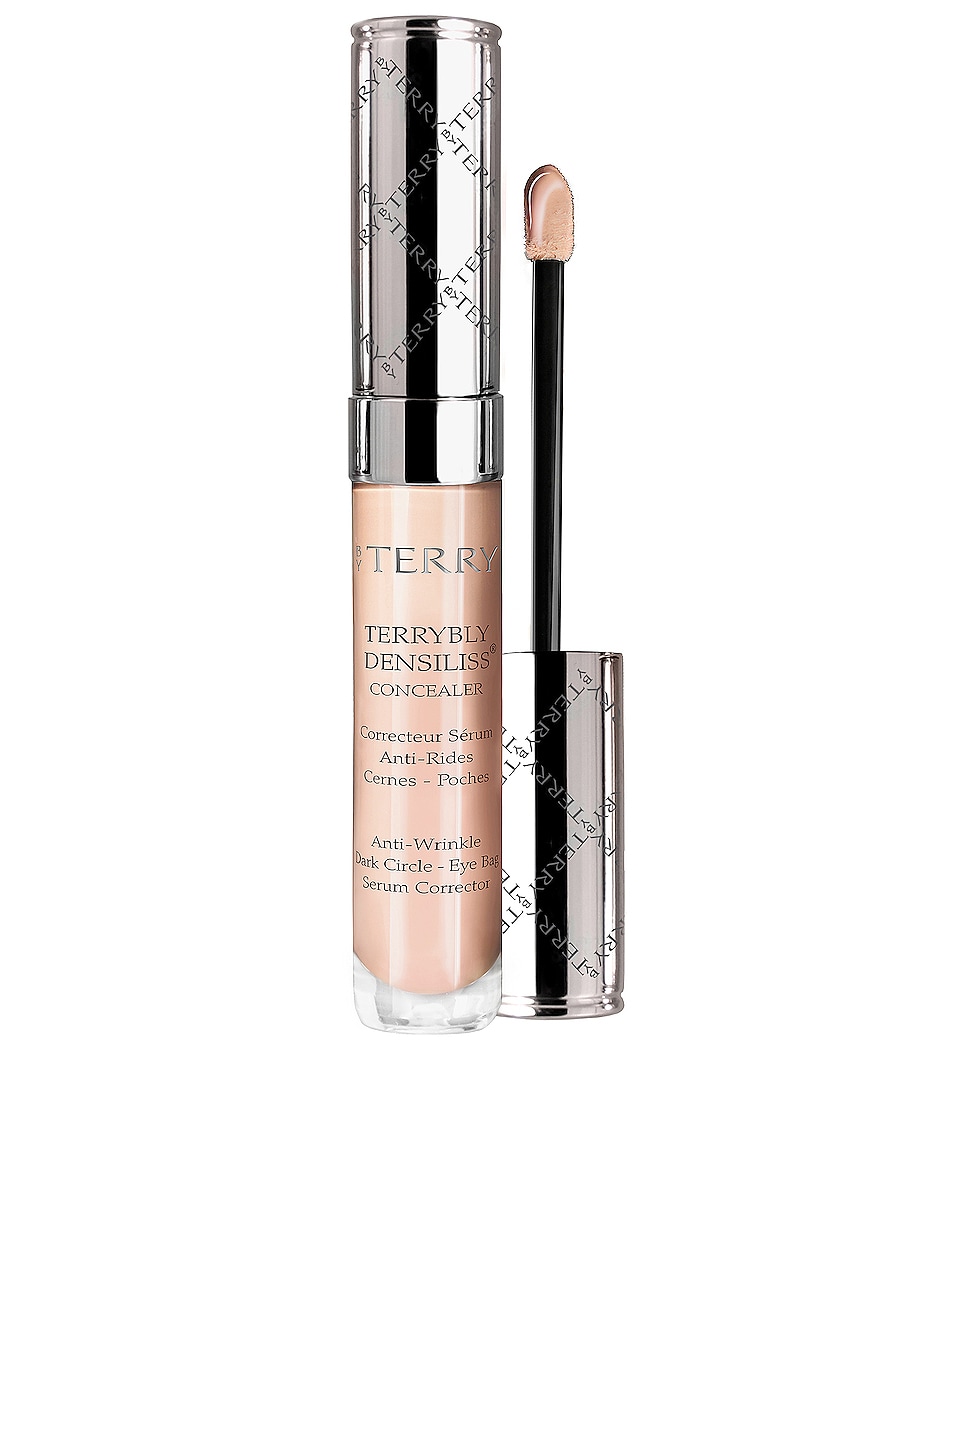 Консилер By Terry Terrybly Densiliss, цвет Fresh Fair by terry mascara terrybly